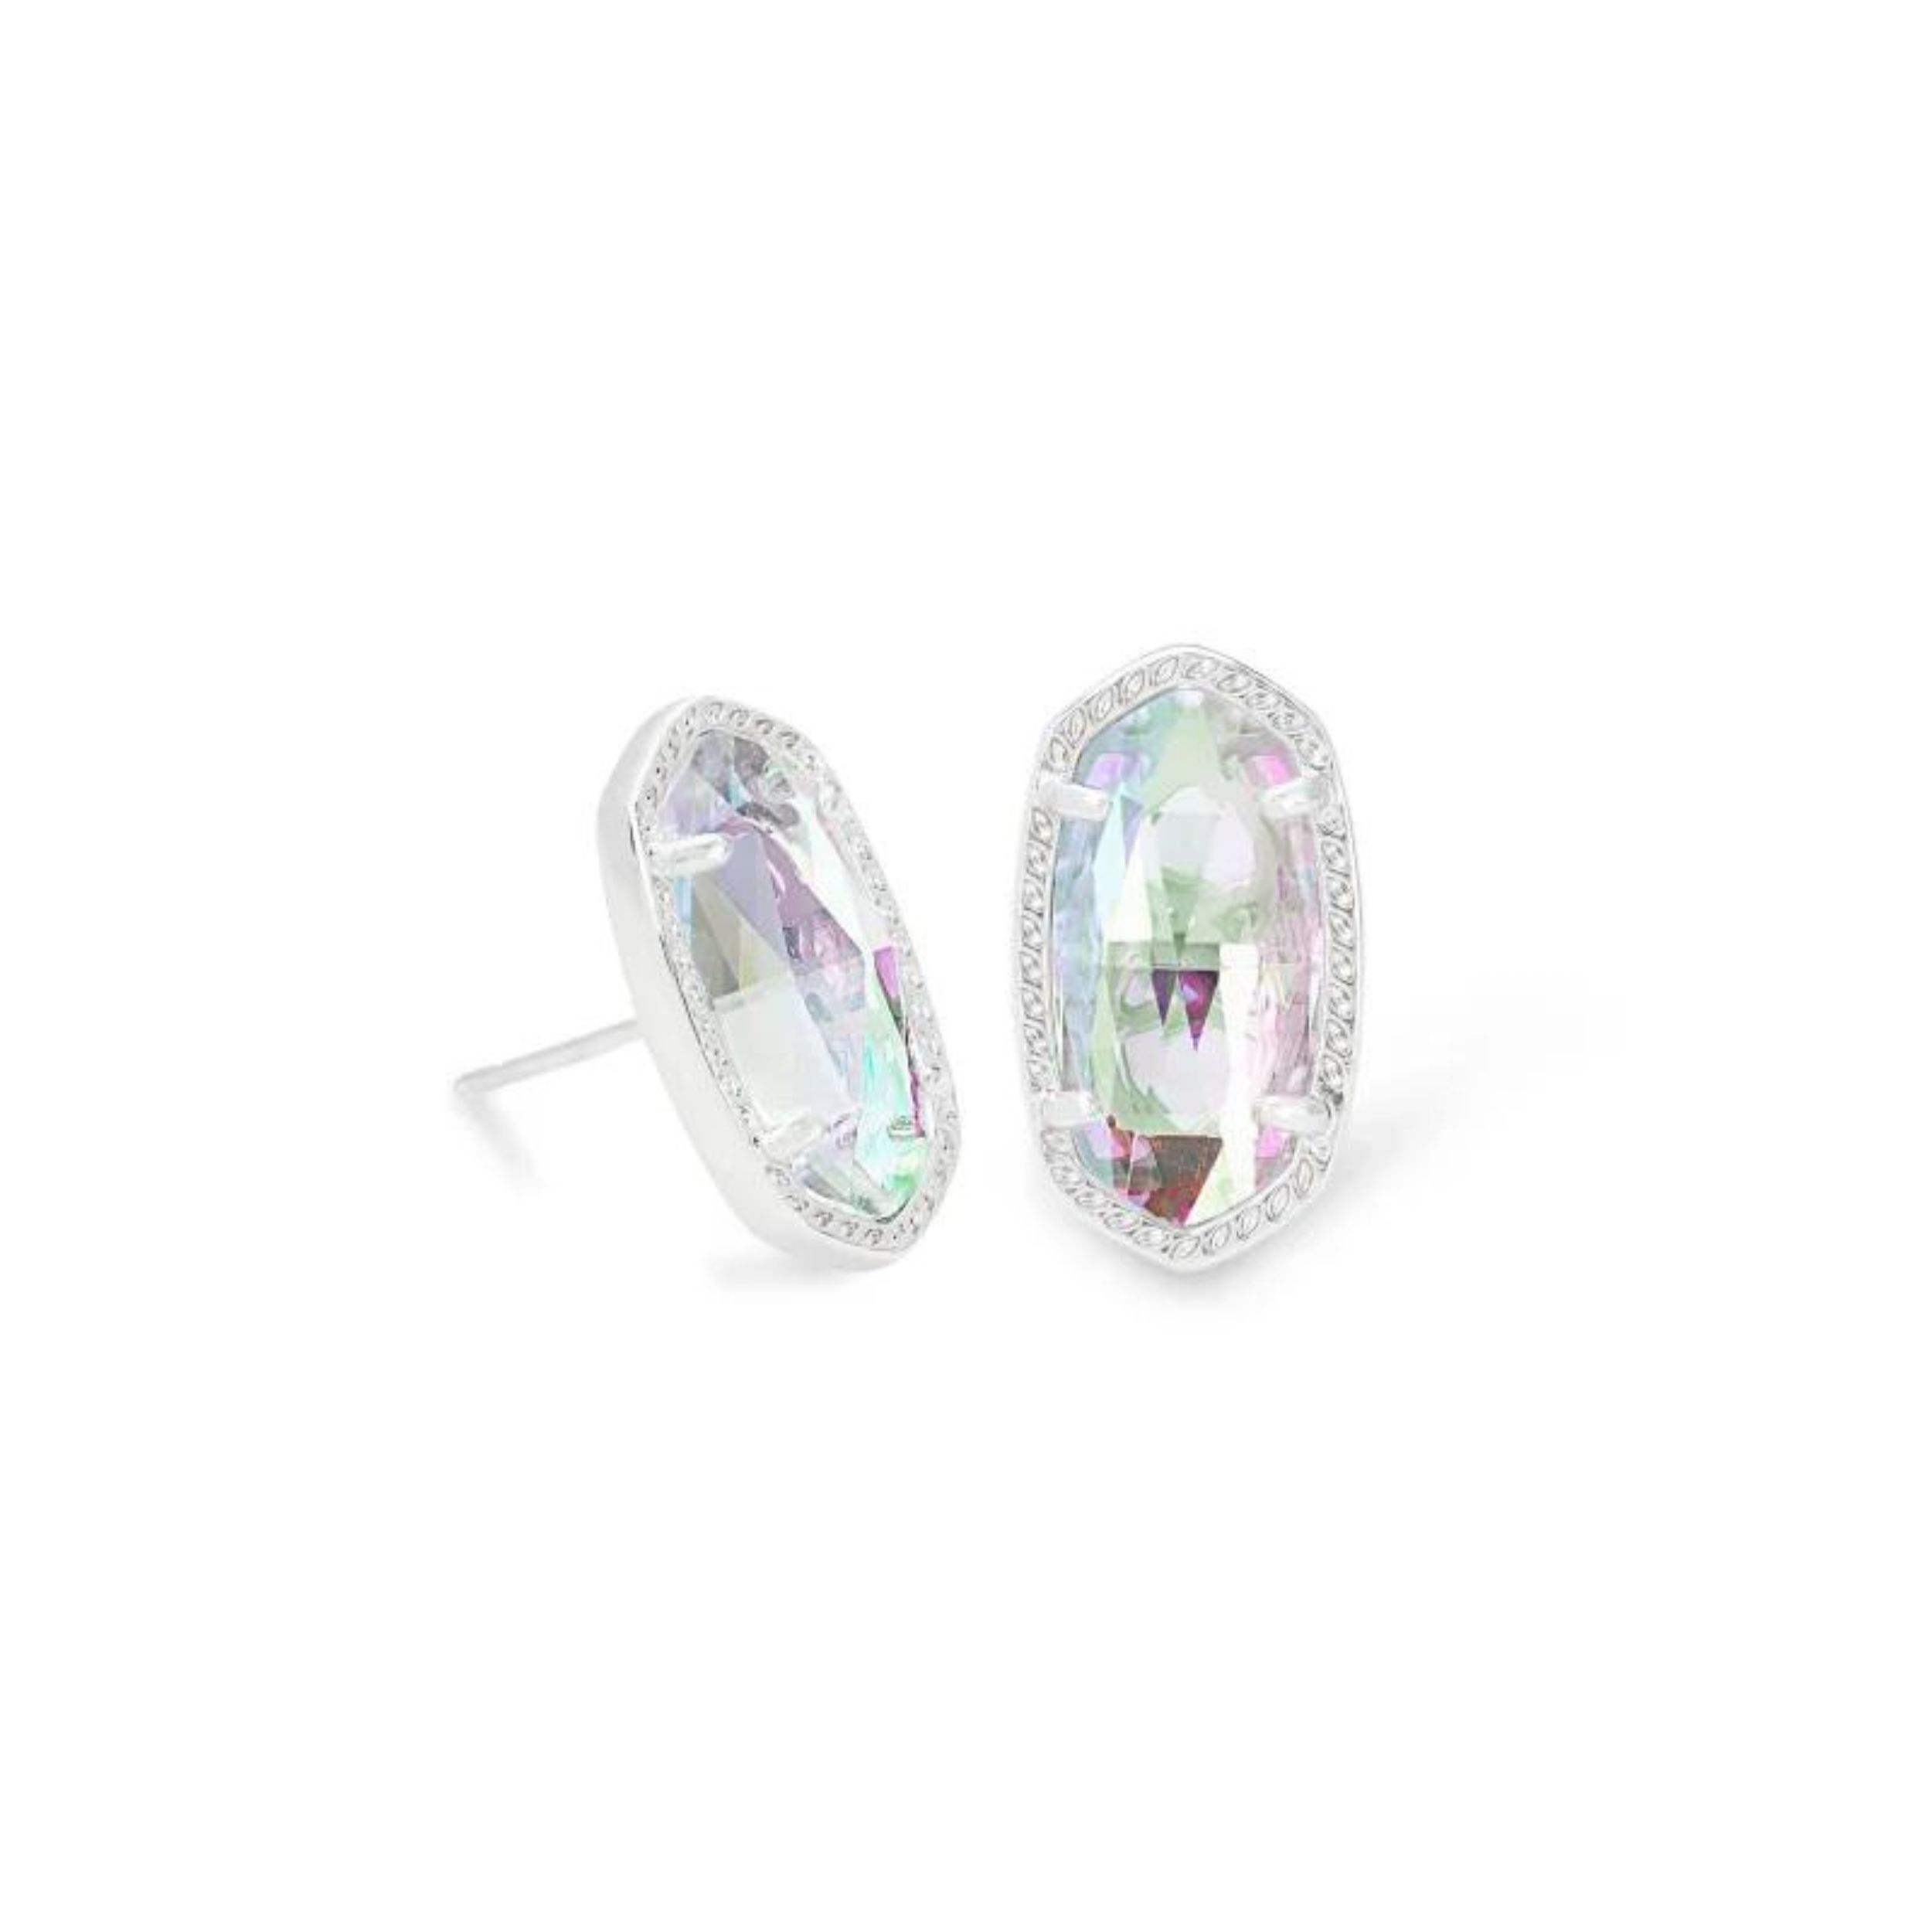 Silver stud earrings with dichroic glass stone, pictured on a white background.